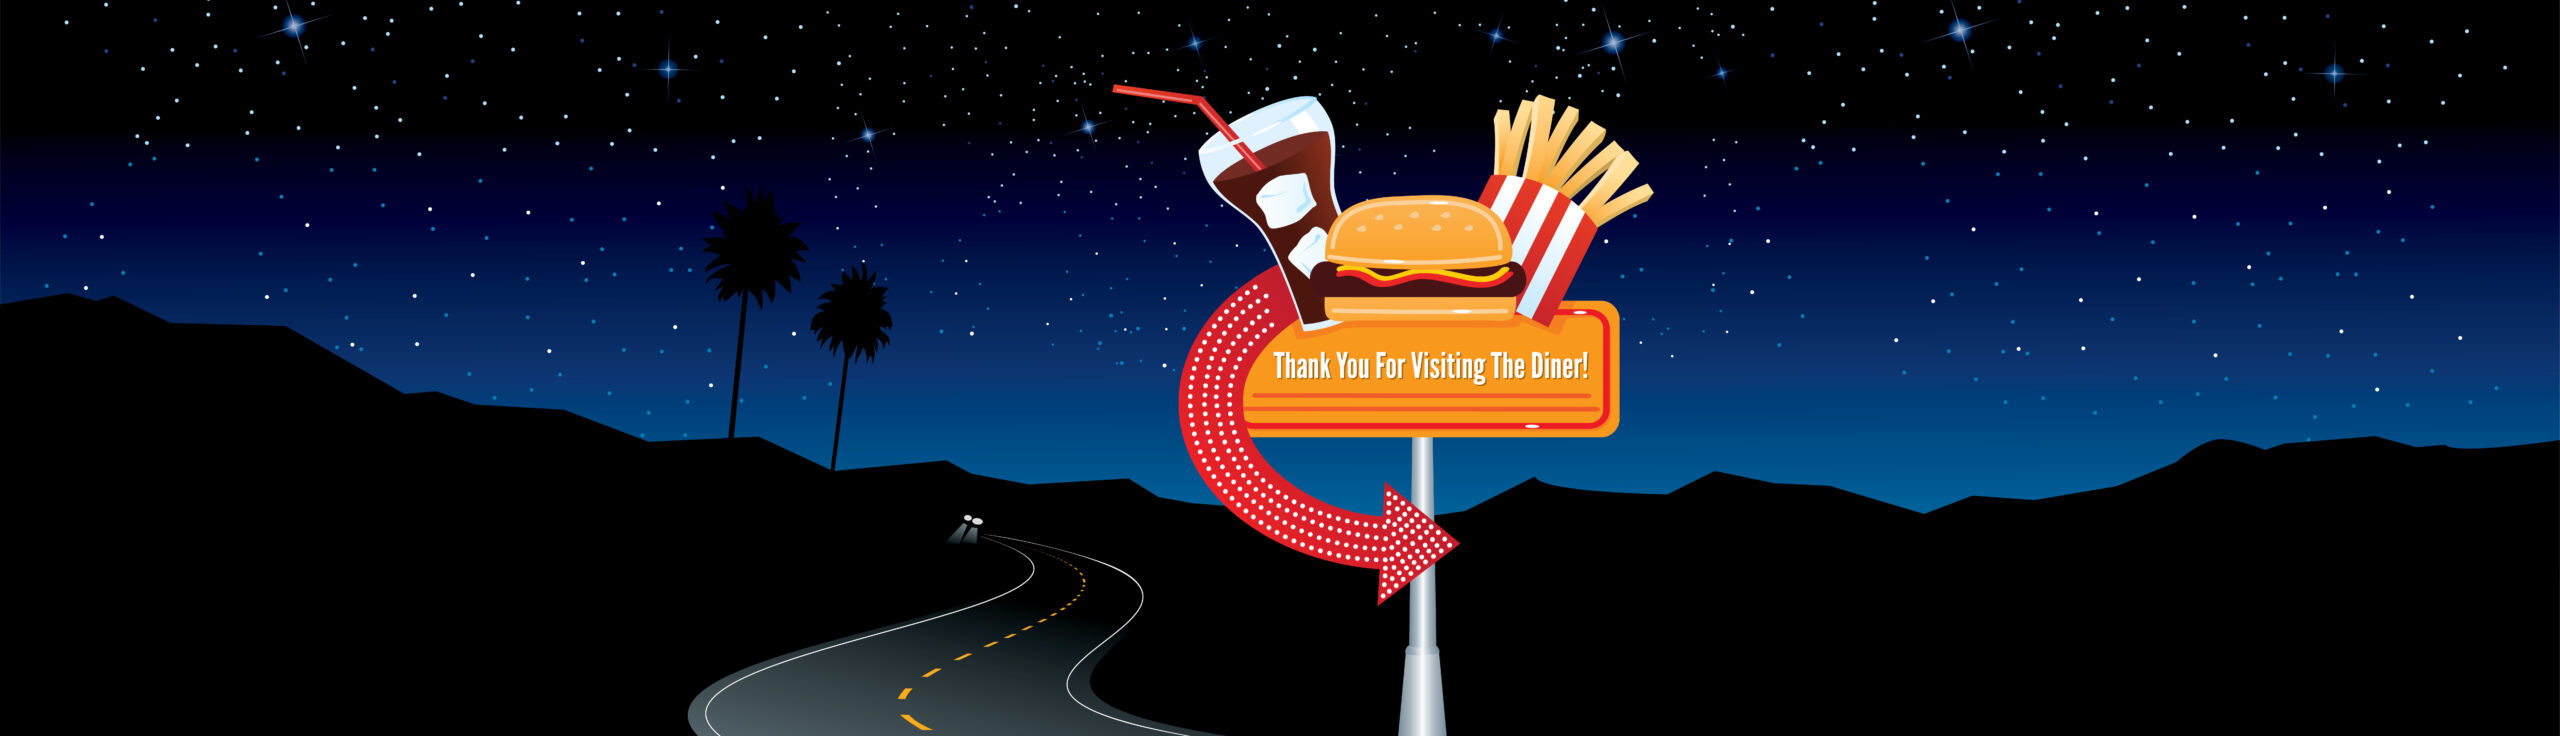 PICA Marketing Diner landing page slider 2022. Illustration of night scene with mountains in background and car driving down road and diner sign in foreground reading, 